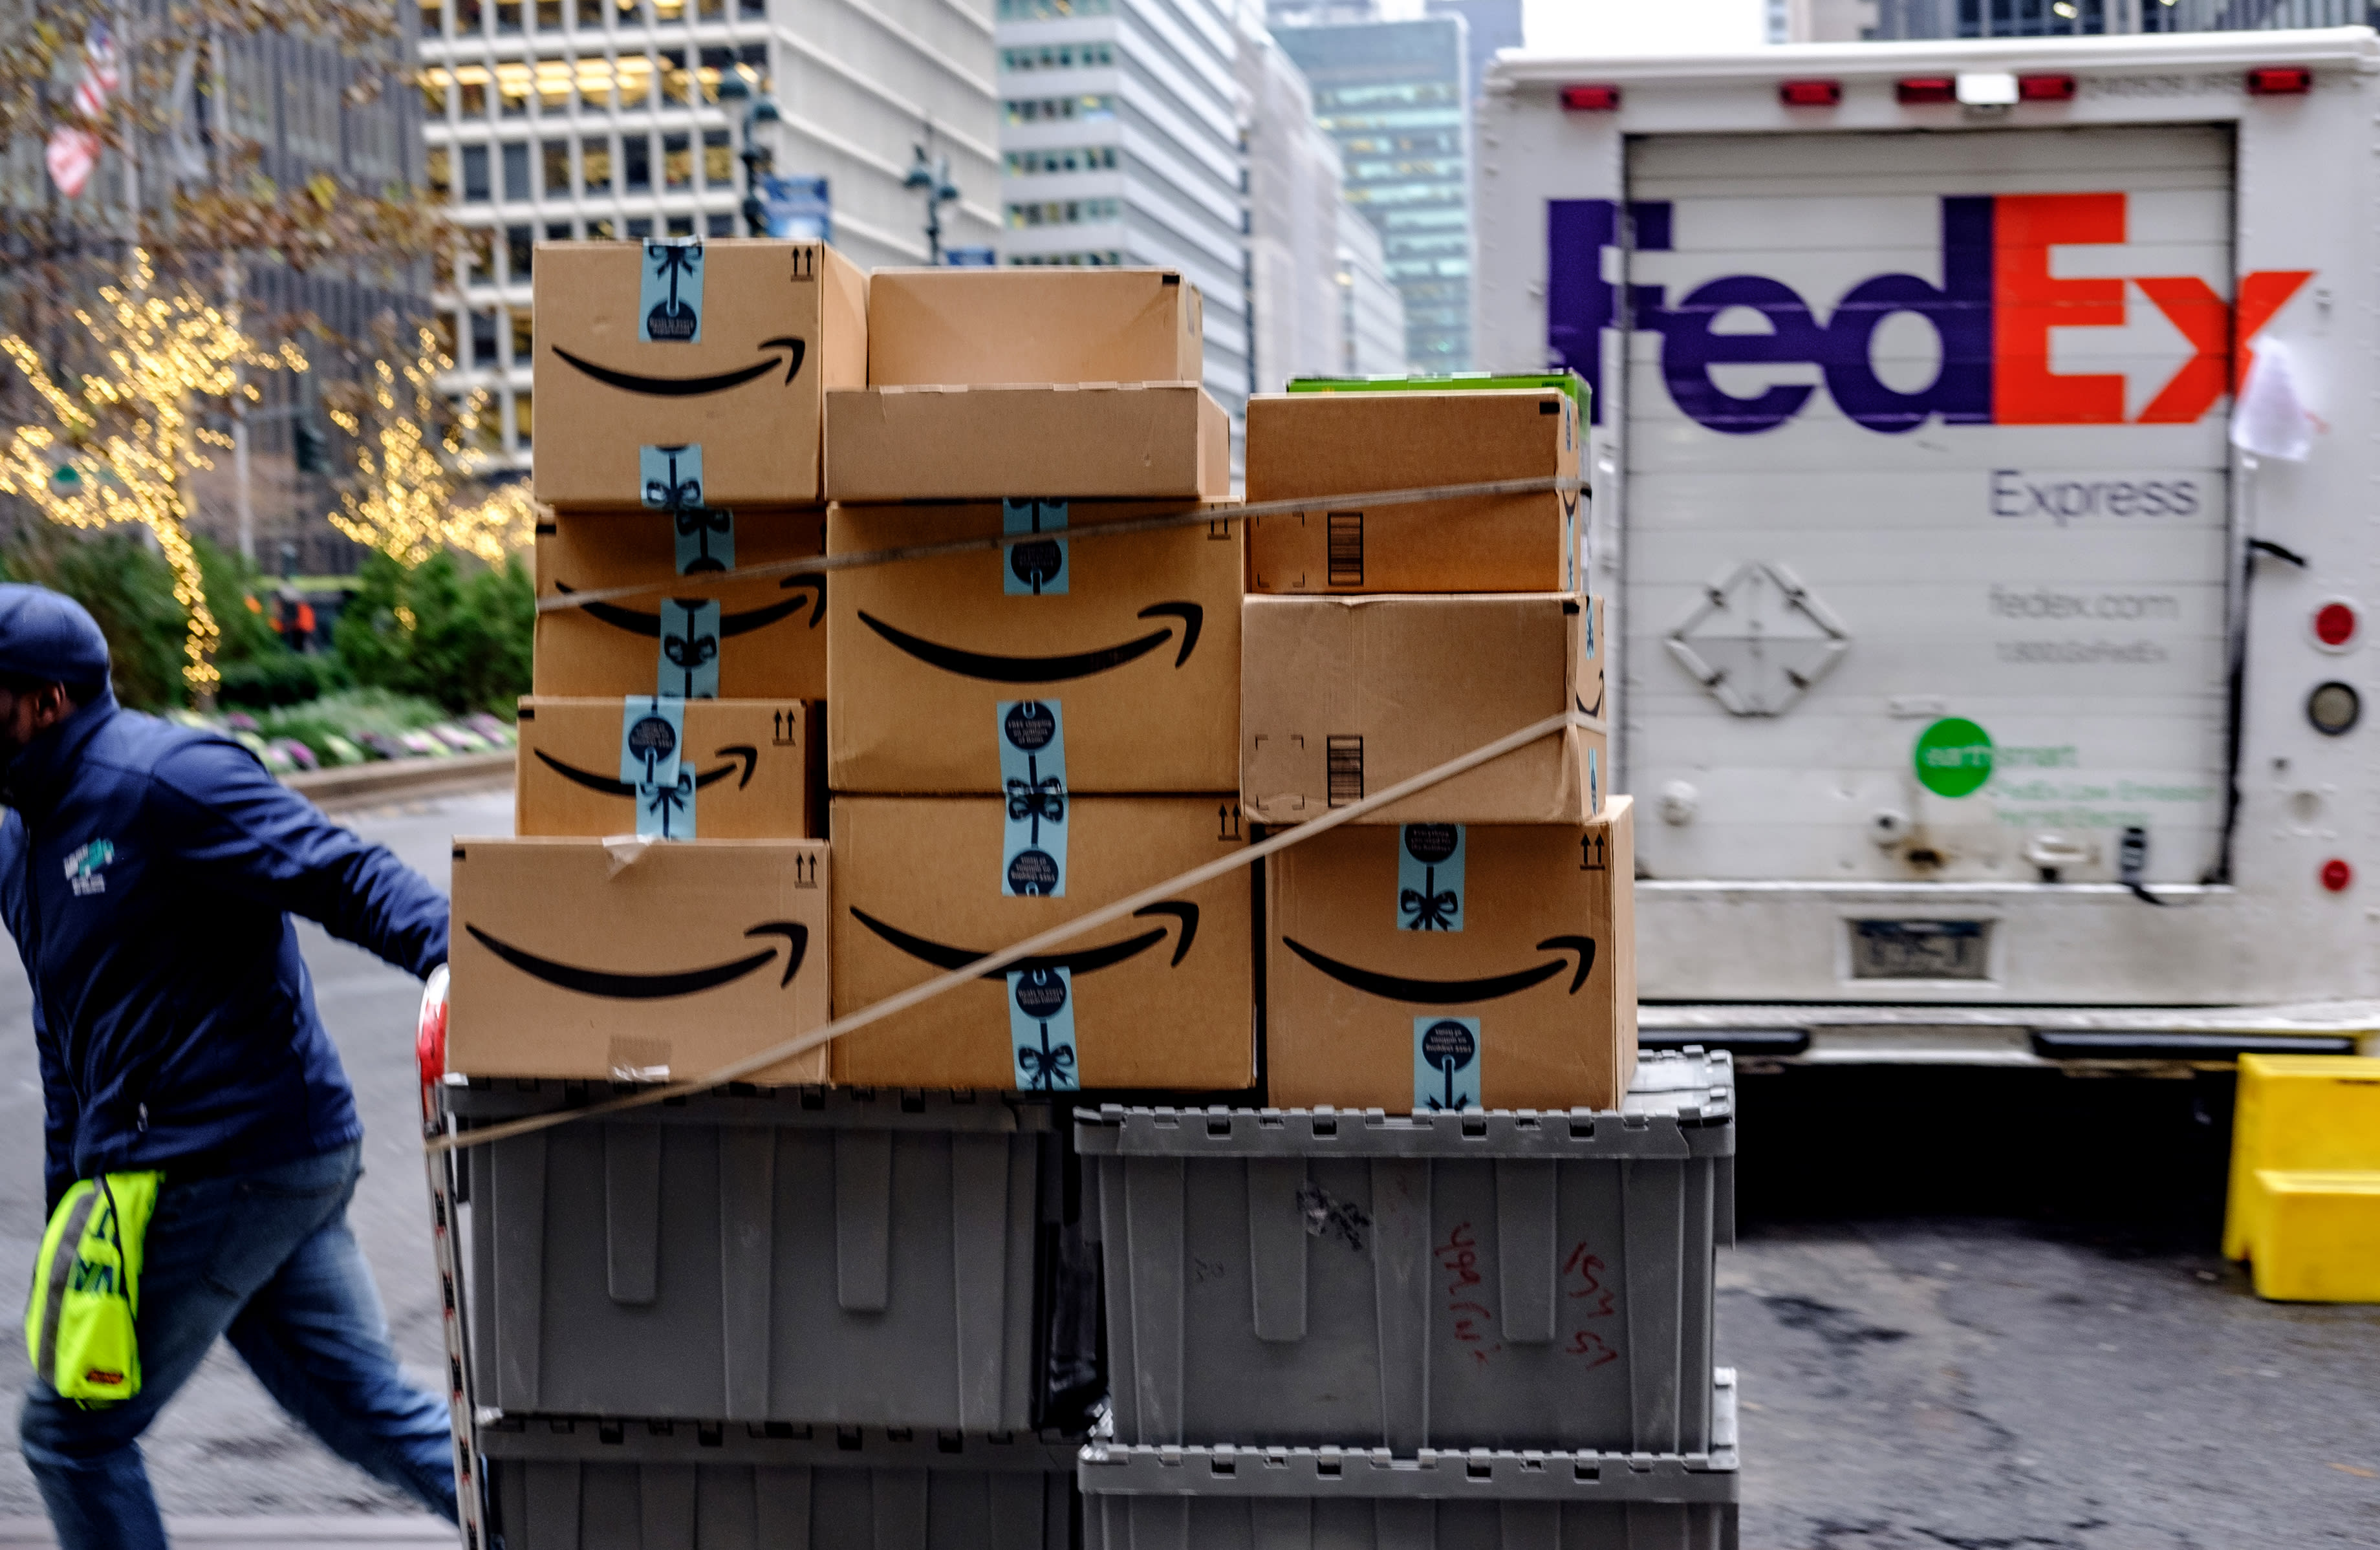 FedEx, UPS jockey with Amazon as tech giant expands into shipping